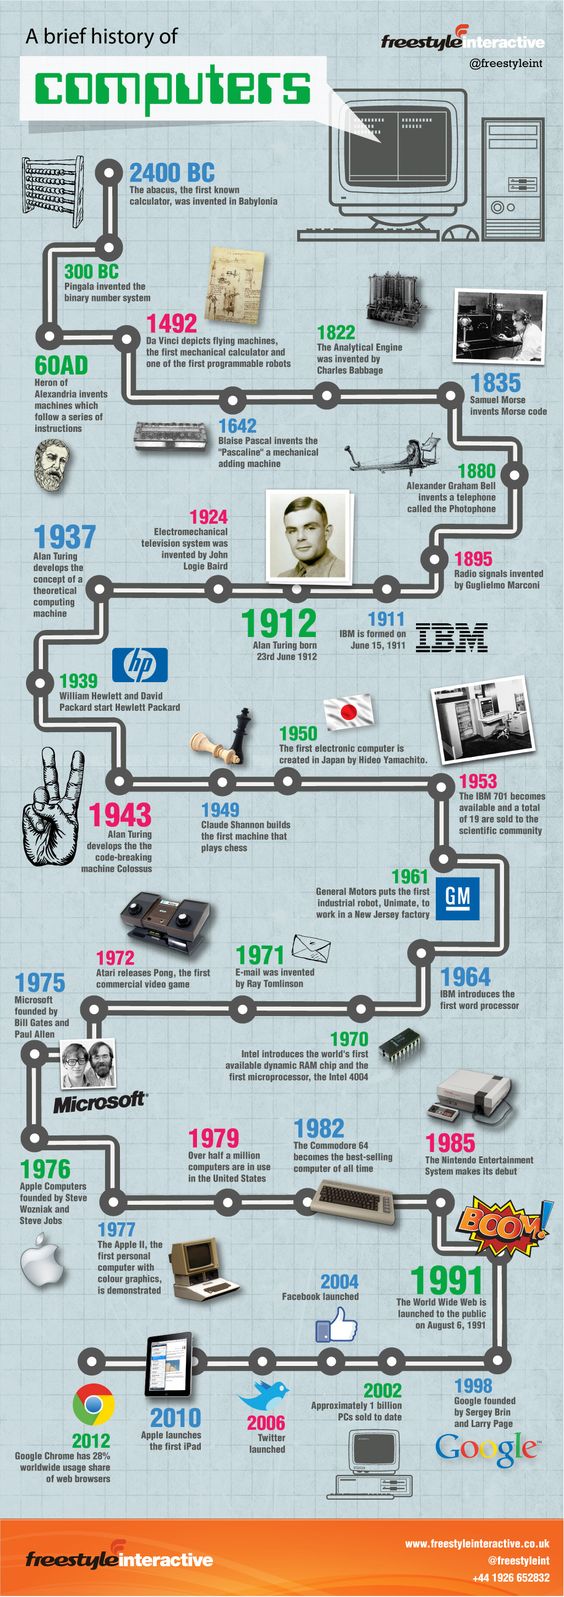 A Brief History of Computers - Image 1